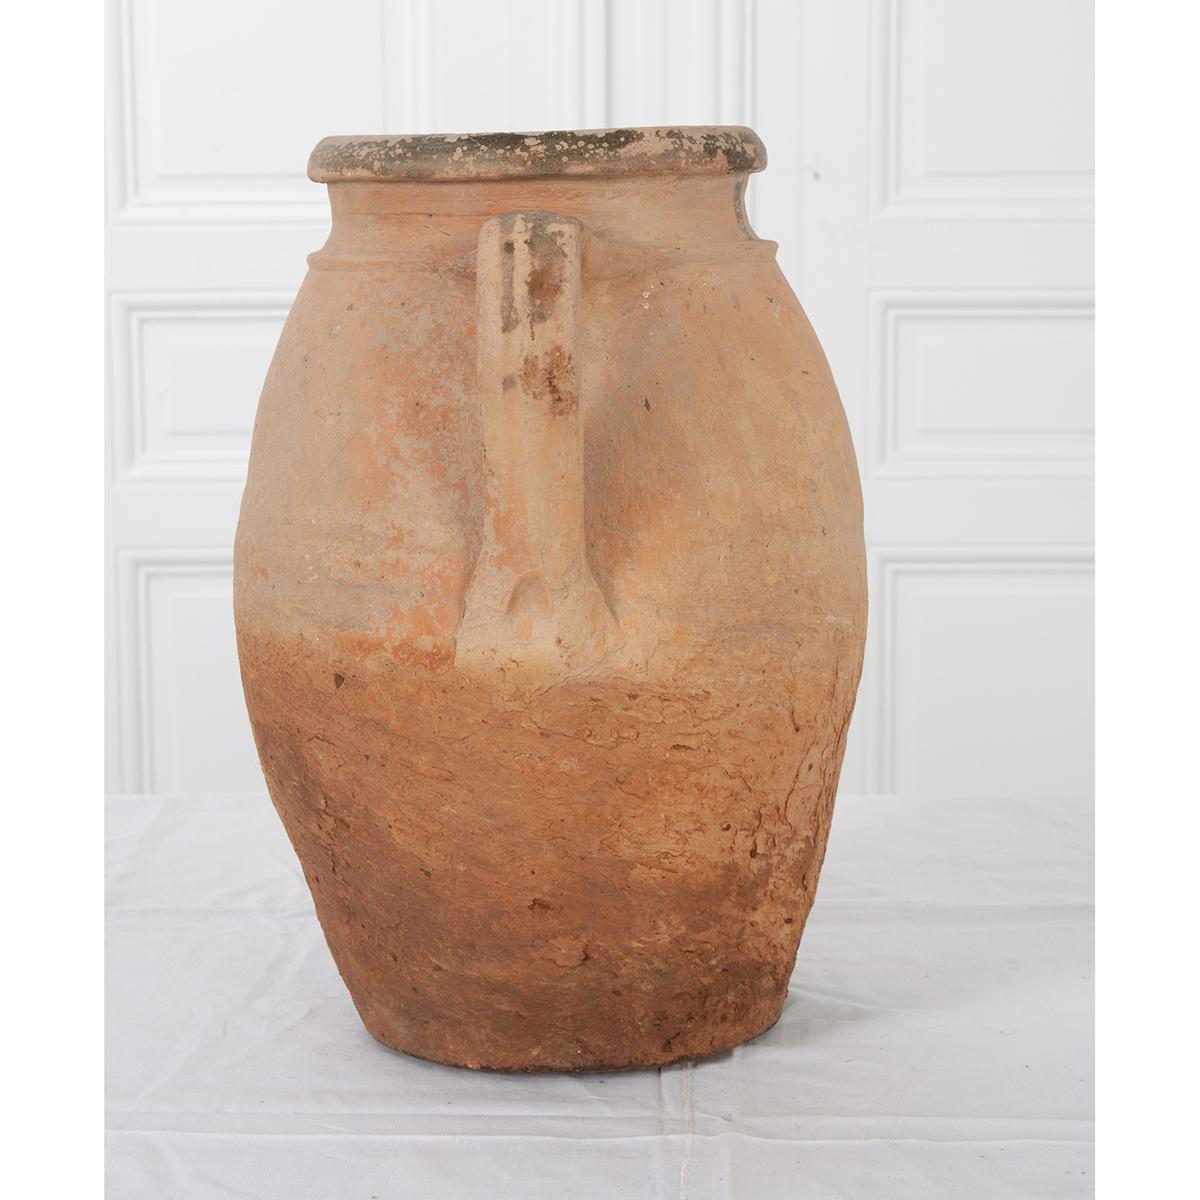 A 19th century terracotta olive jar from France. Its looped handles make lifting the pot a little easier, and the subtle banding found above them, around the lip, gives it a distinct style. While they lend themselves to the kitchen, these charming